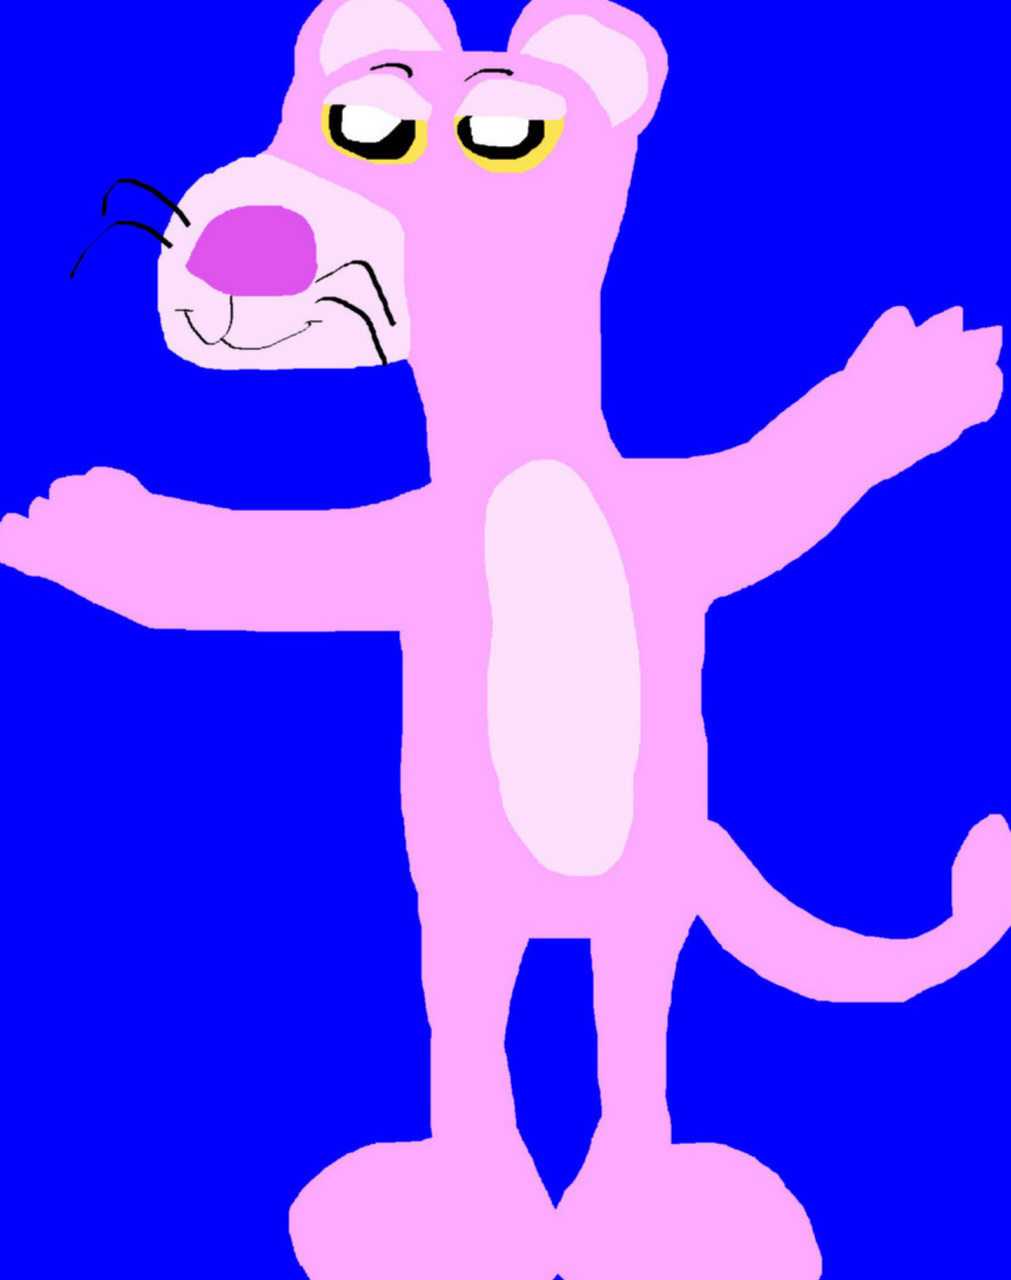 Sort Of Chubbier Pink Panther MS Paint by Falconlobo